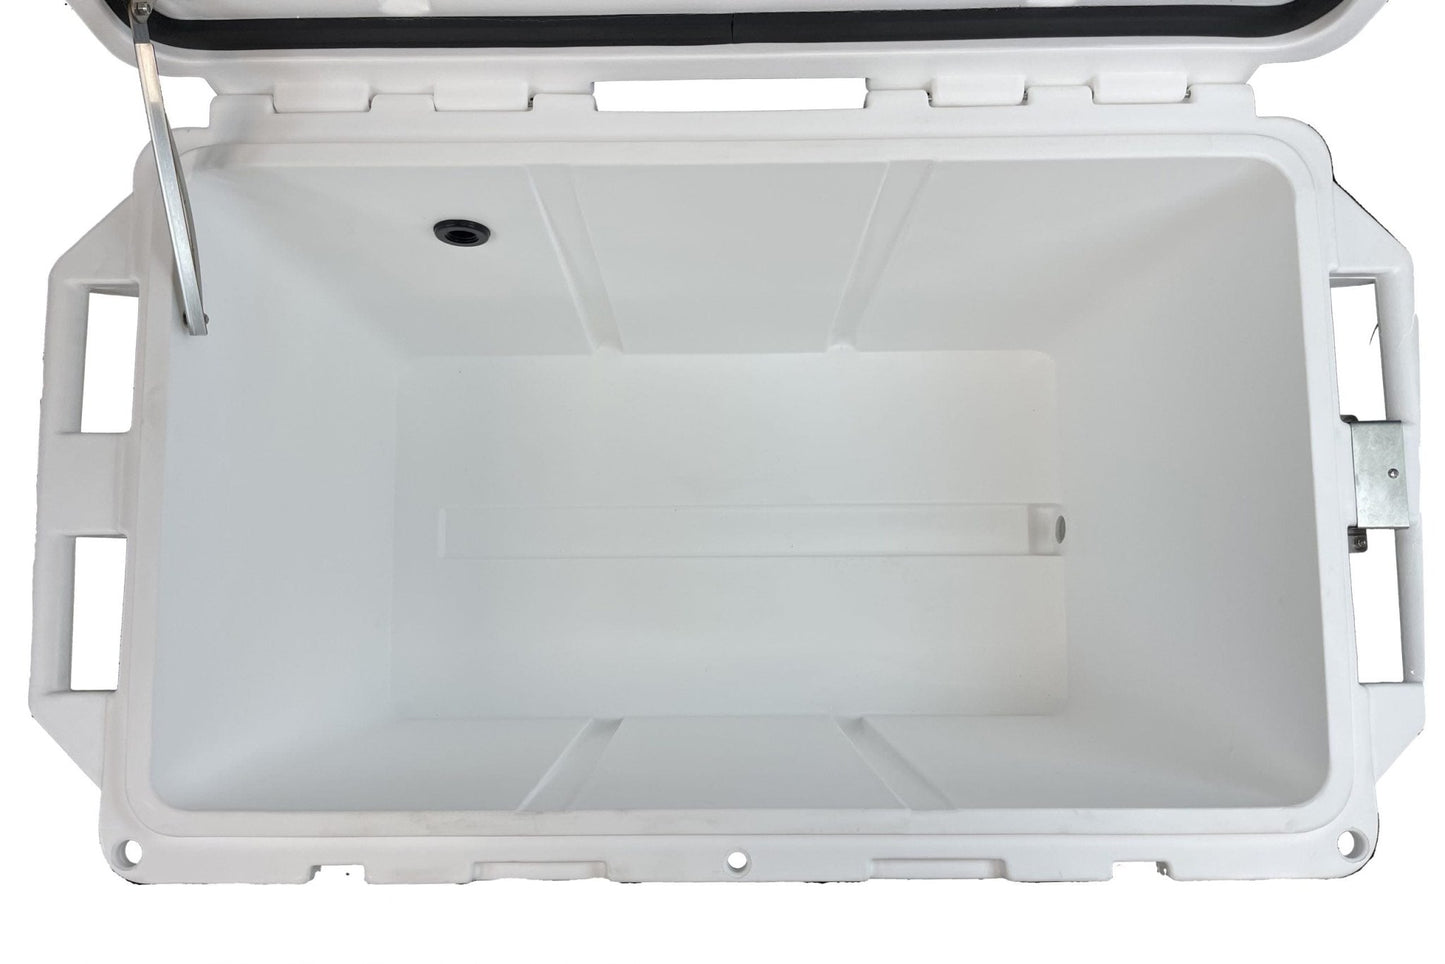 Cooler Cold Plunge Tub - The Cold Plunge Store